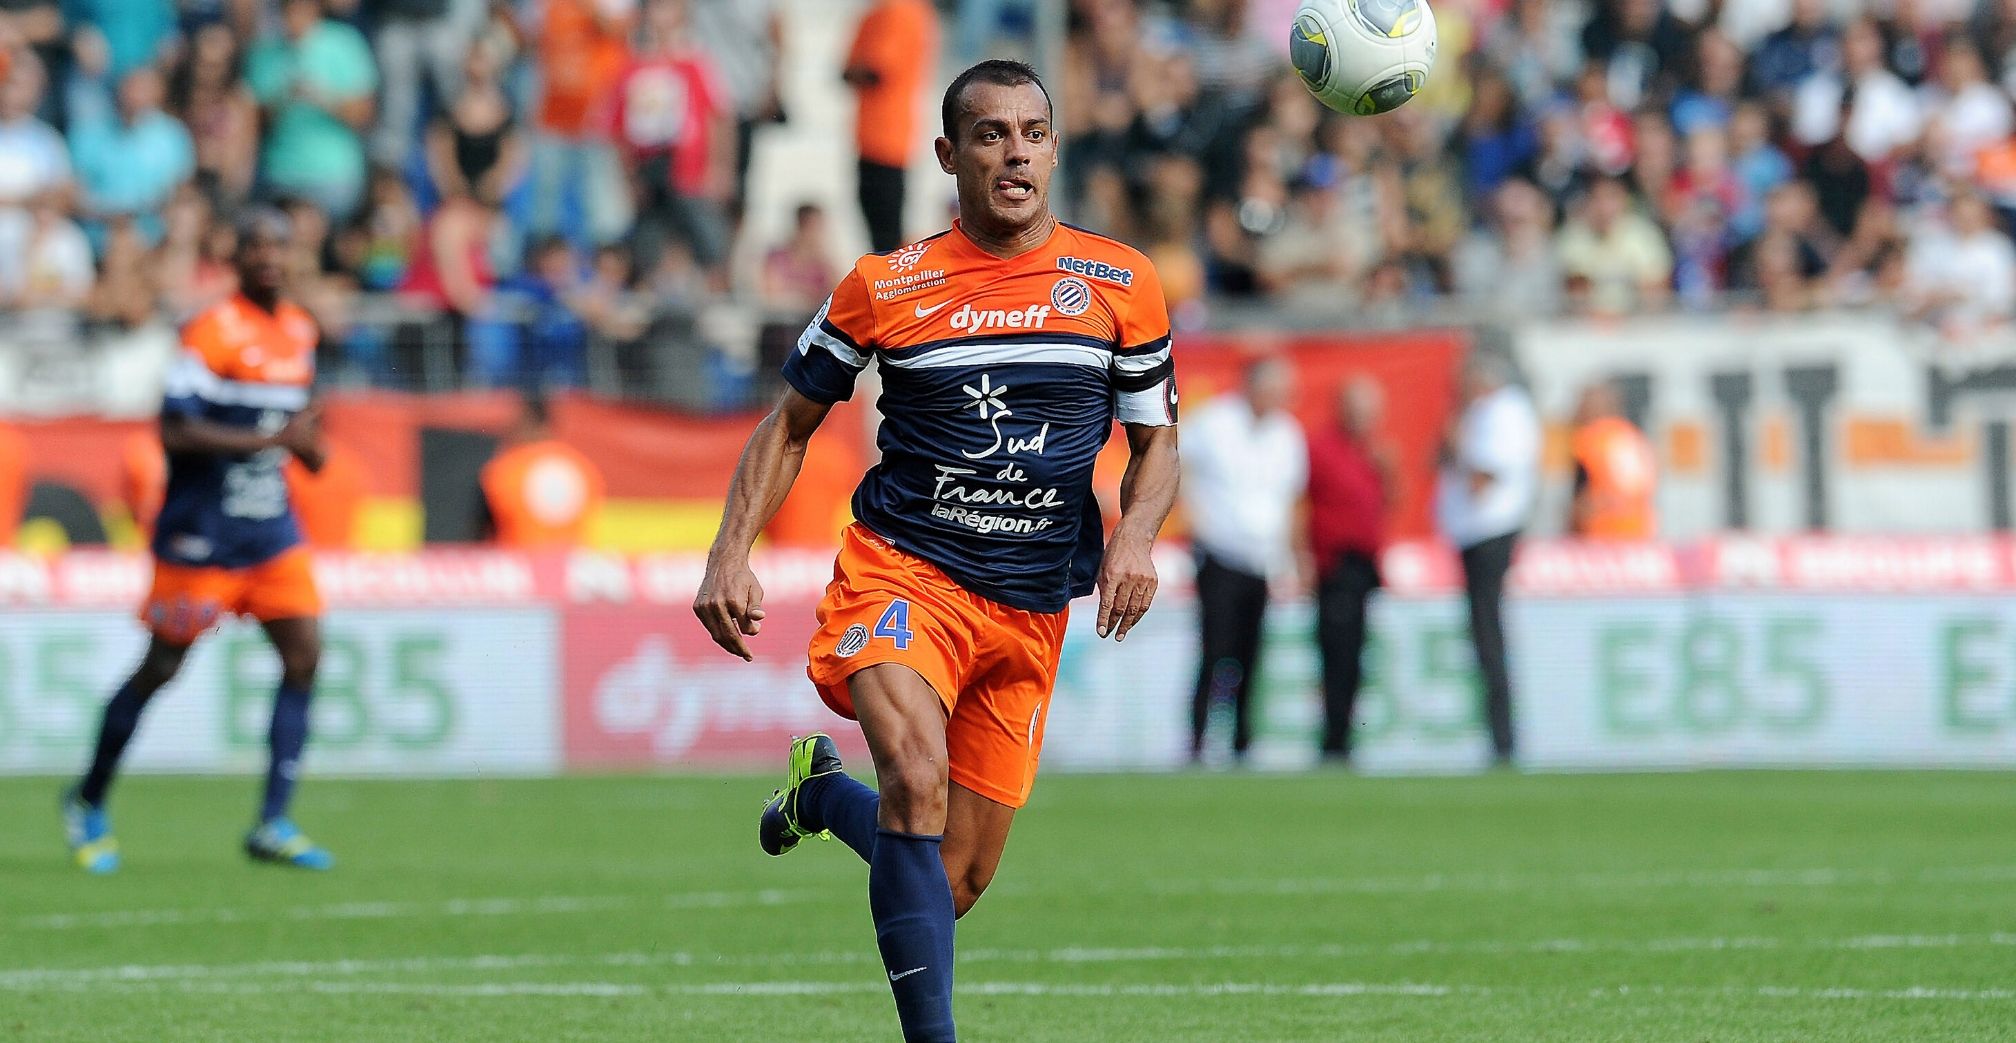 Vitorino Hilton playing for Montpellier in October 2013